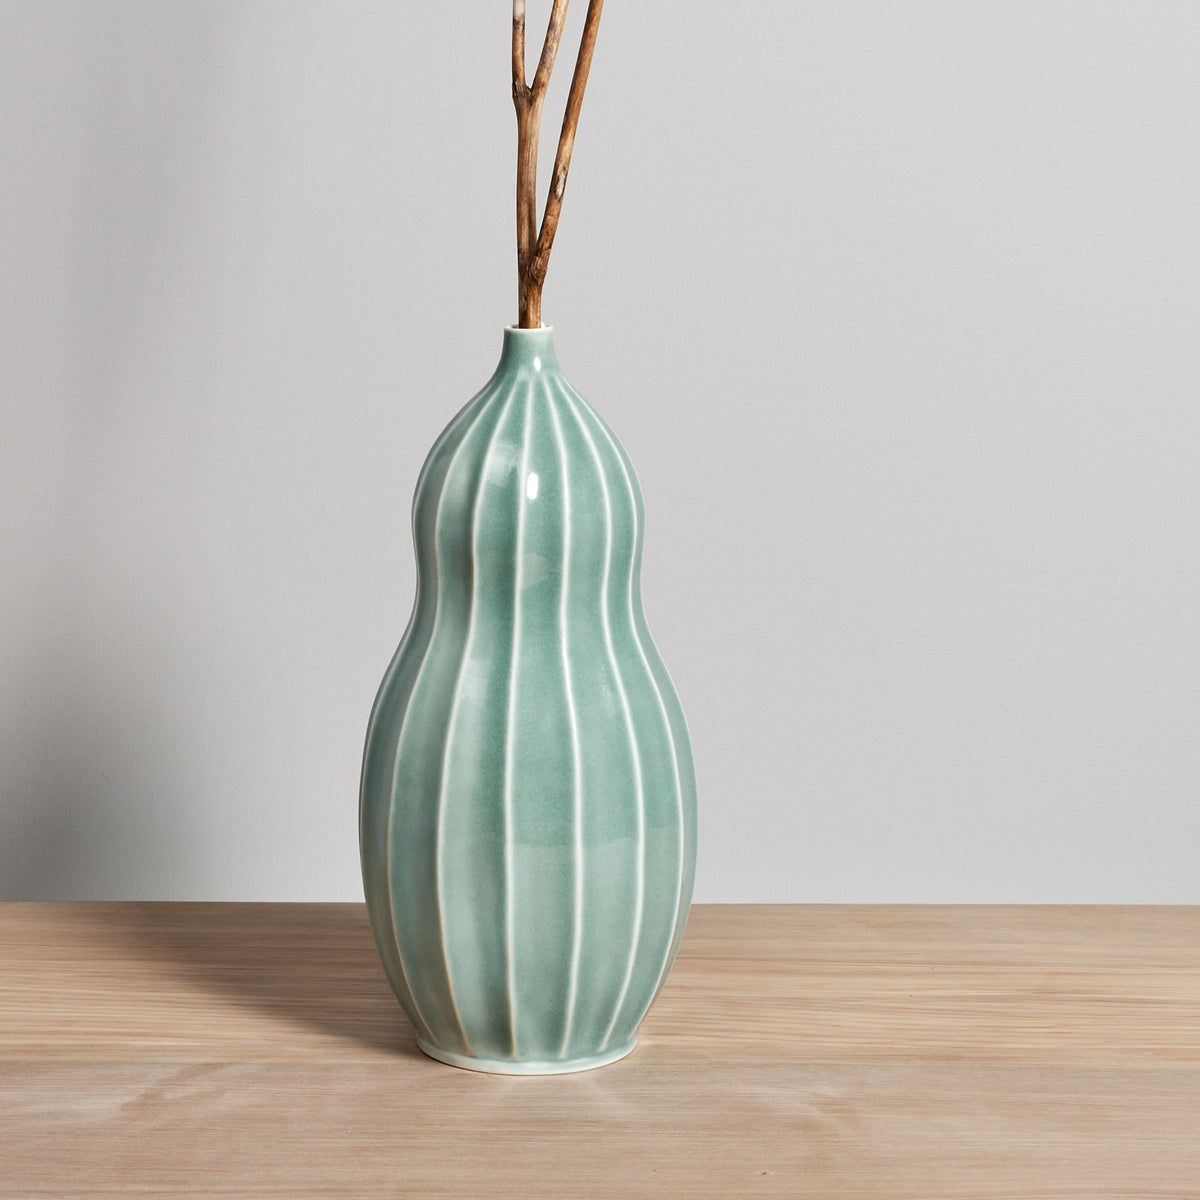 A Gourd Vase - Celadon with sticks in it, made by Jino Ceramic Studio.